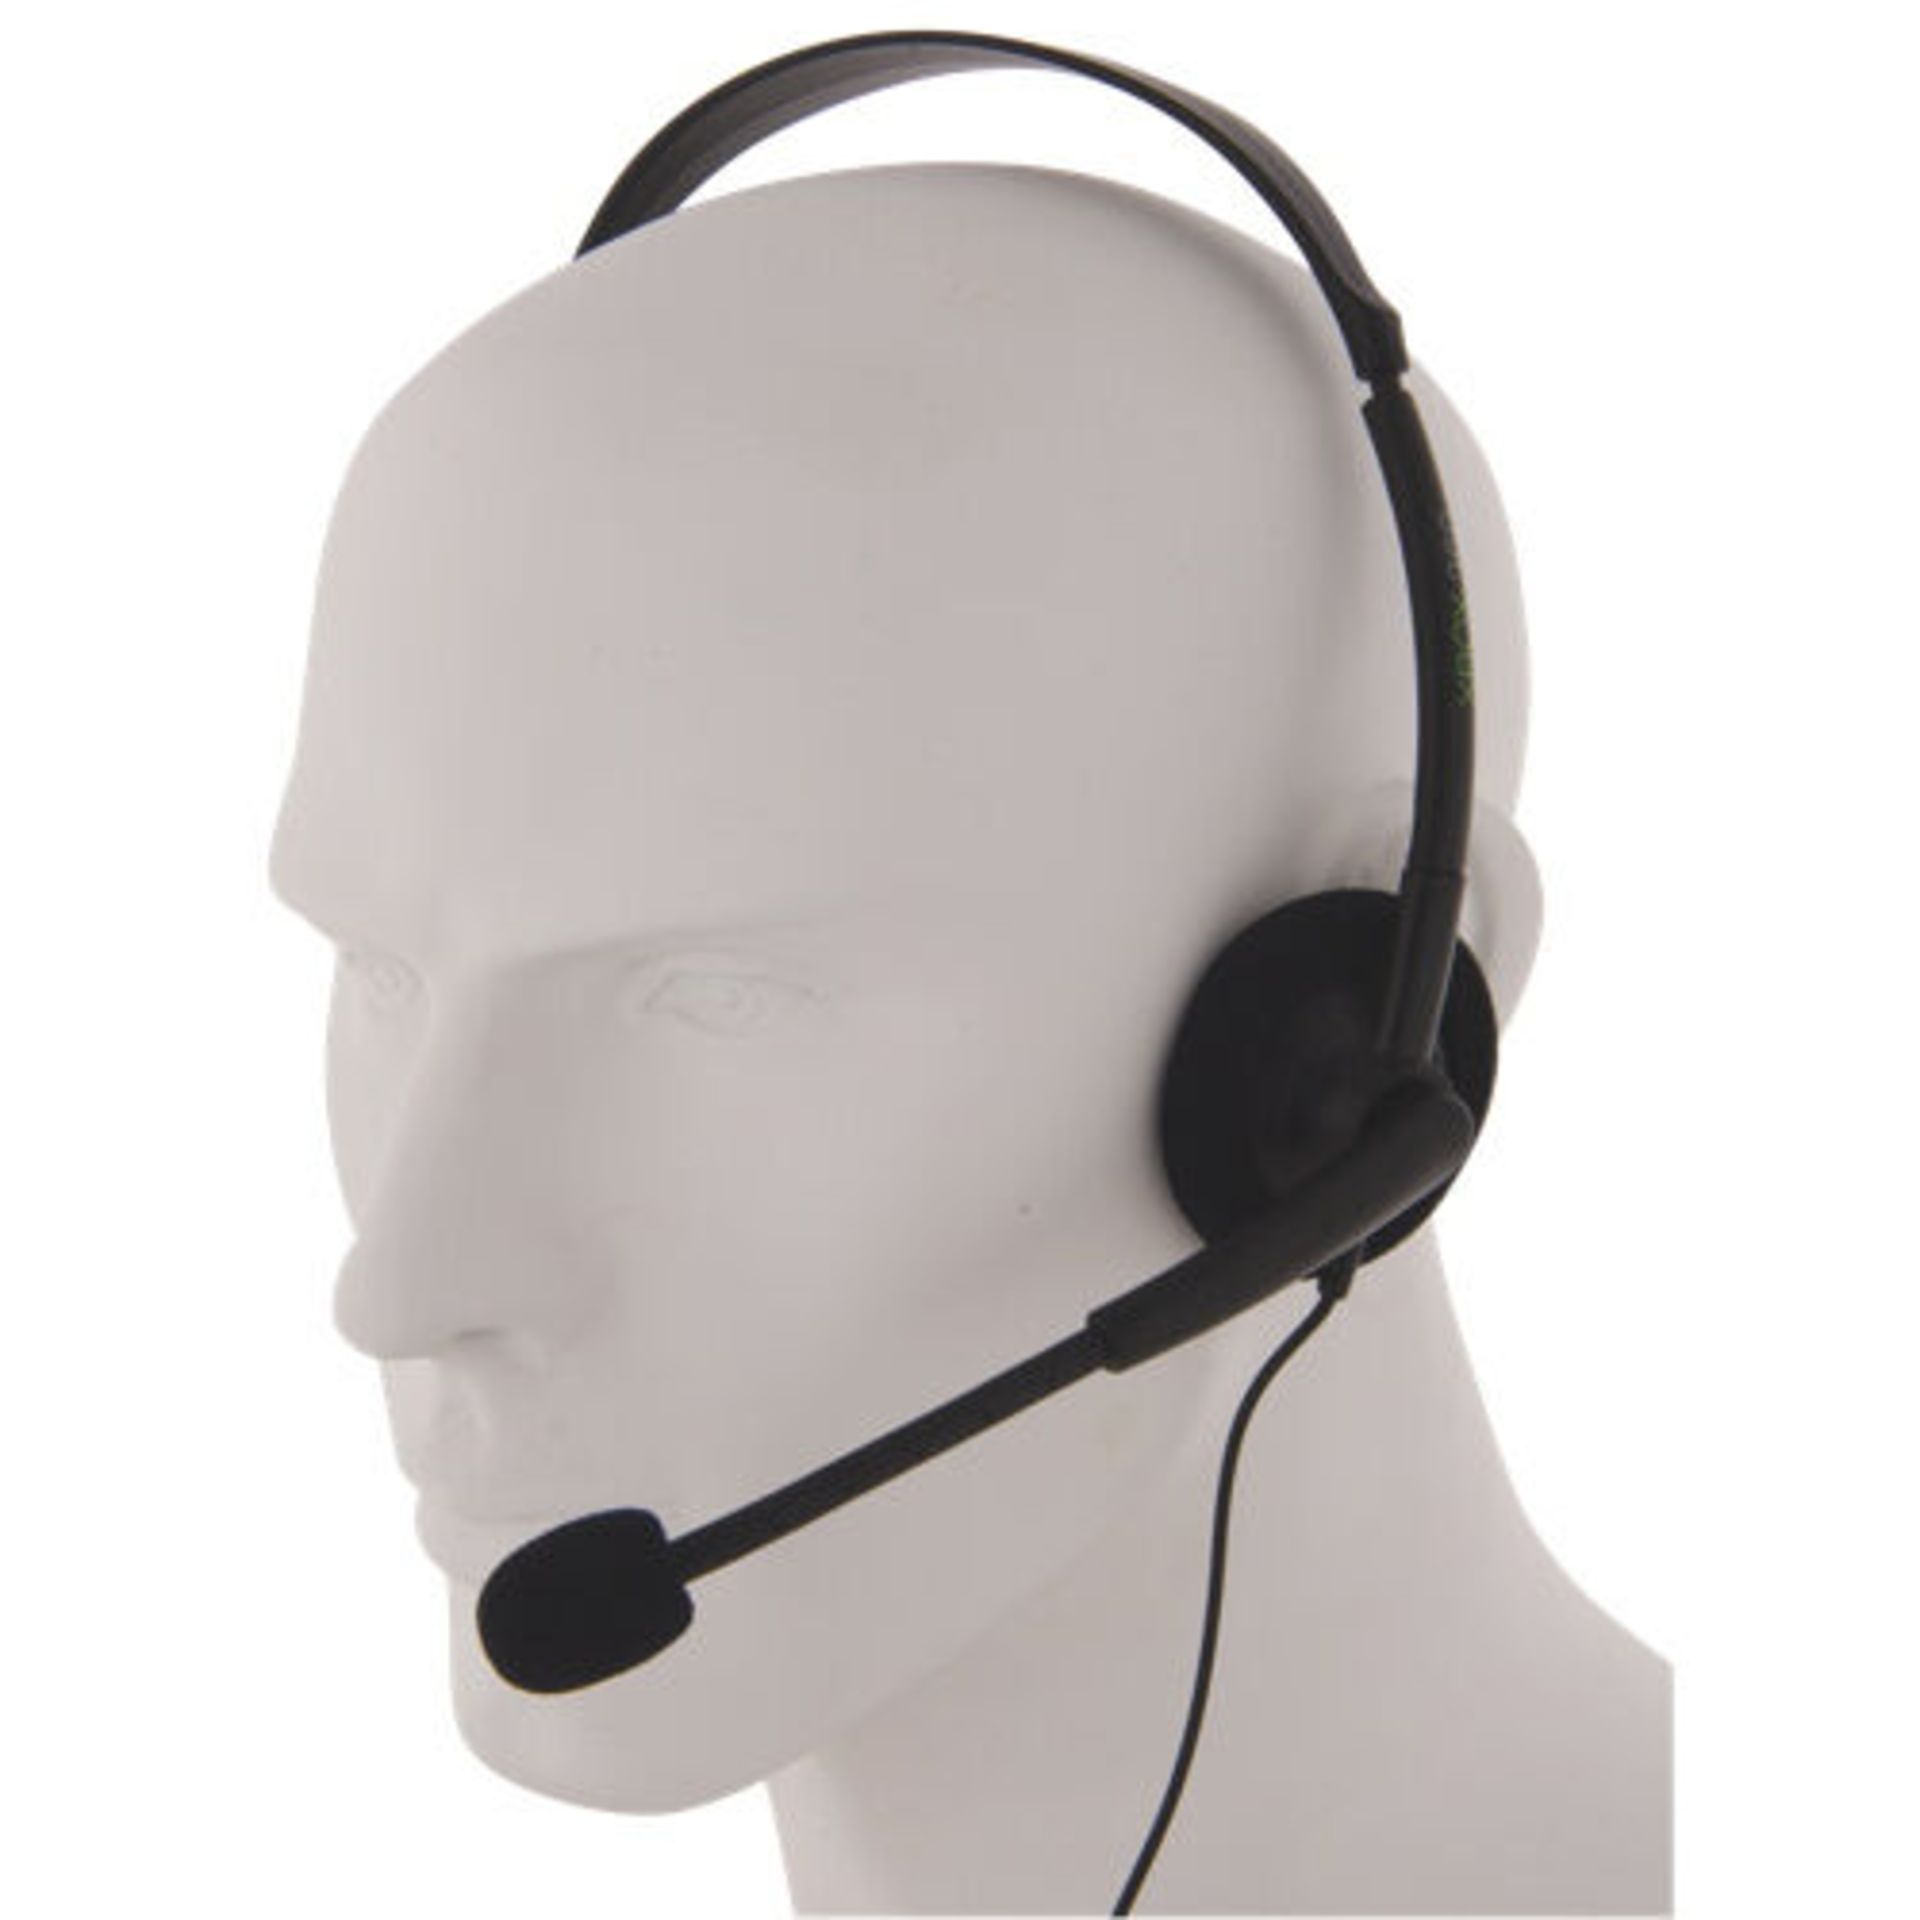 JOBLOT 50 X NEW OFFICIAL XBOX 360 LIVE ONLINE CHAT HEADSET WITH MIC GAMING HEADPHONES 2.5MM AUX - Image 2 of 5